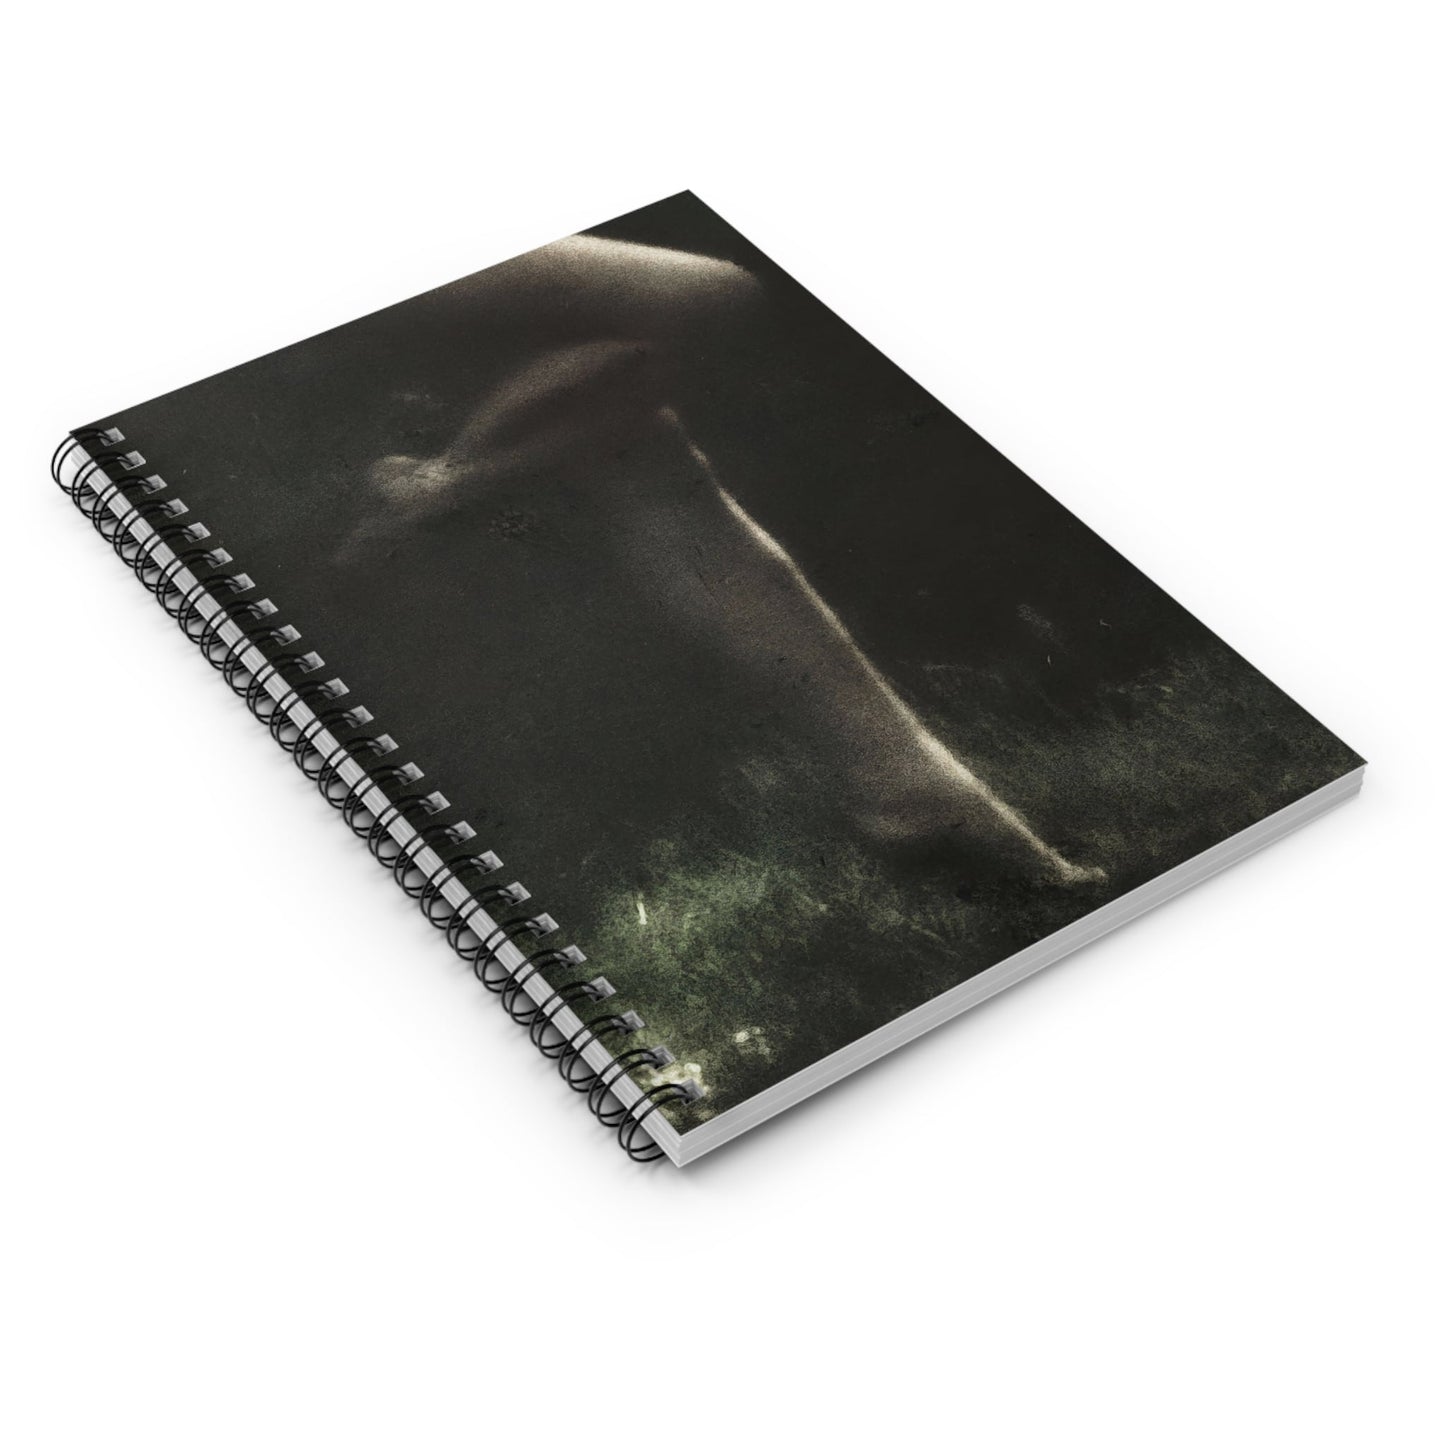 Midnight Forest Spiral Notebook Laying Flat on White Surface